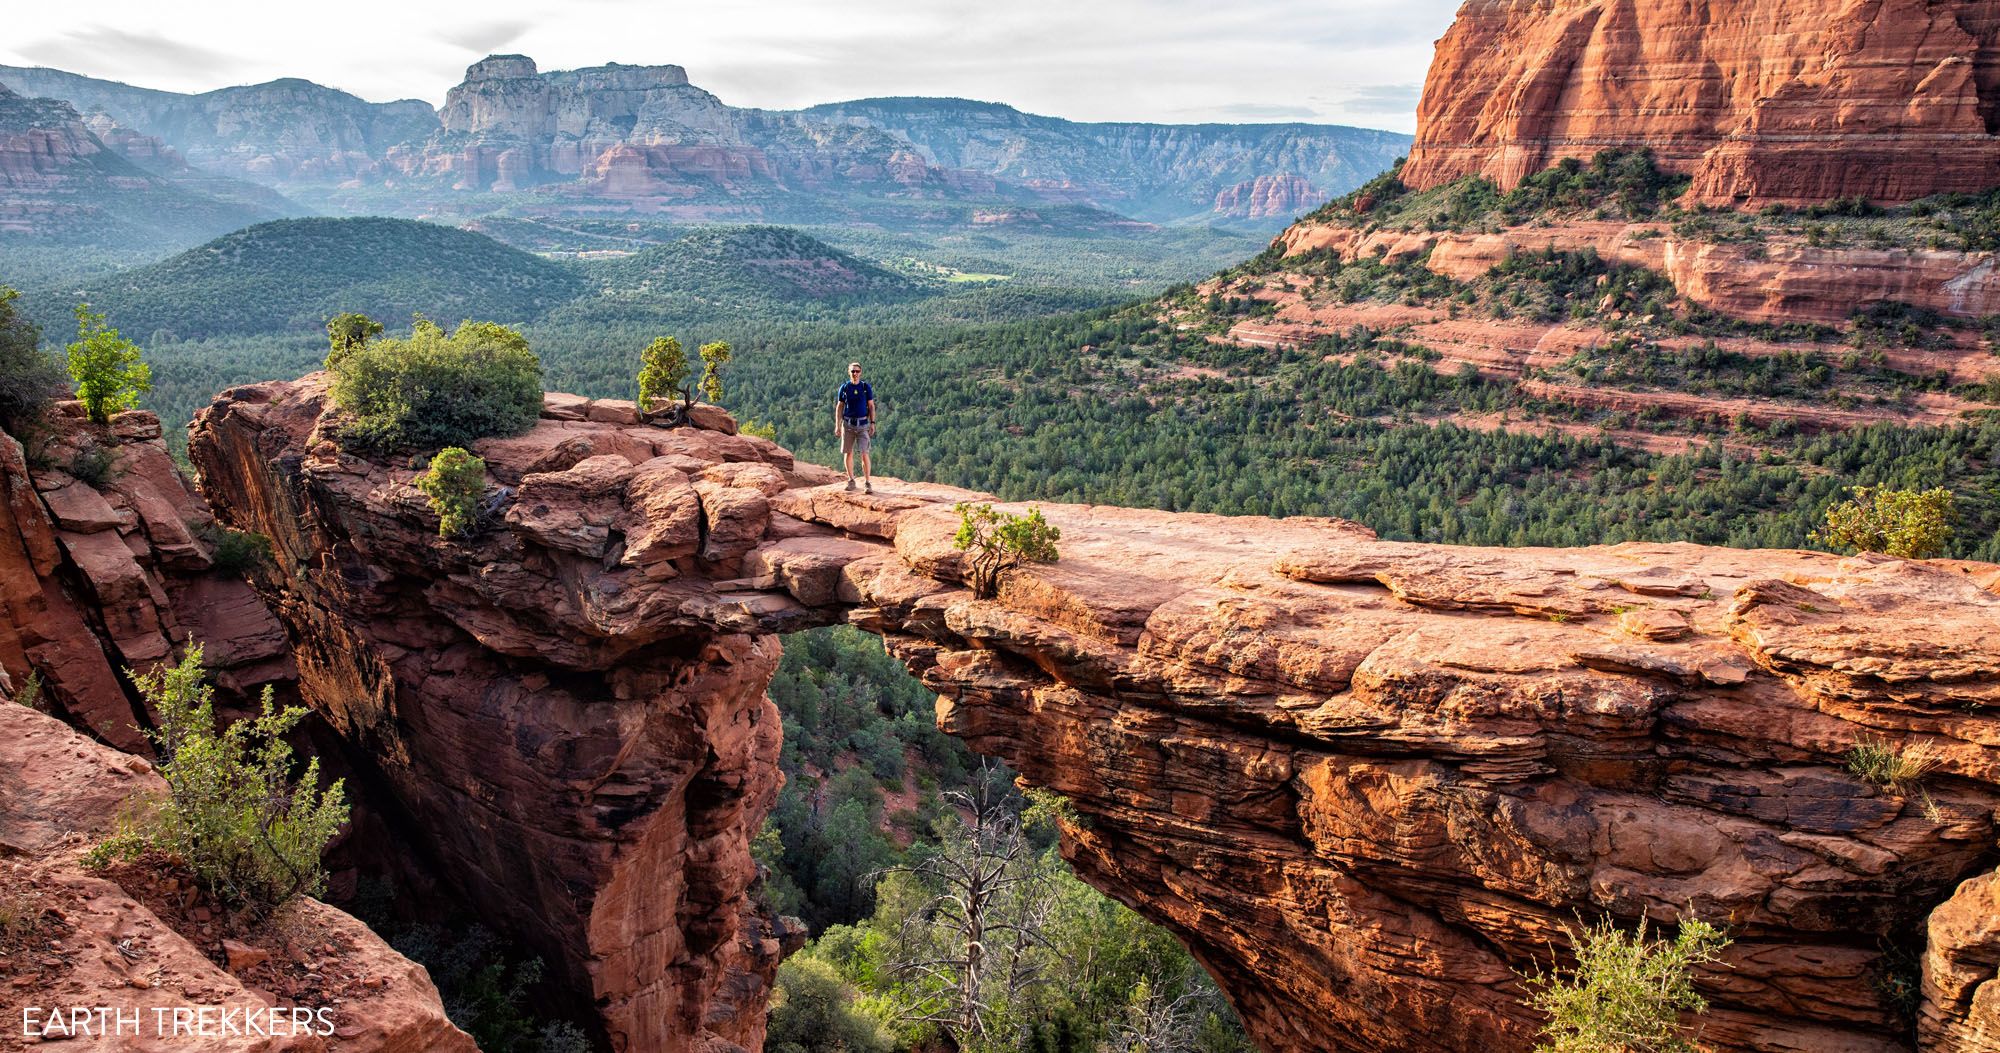 Featured image for “Devils Bridge Hike in Sedona: Step-By-Step Trail Guide”